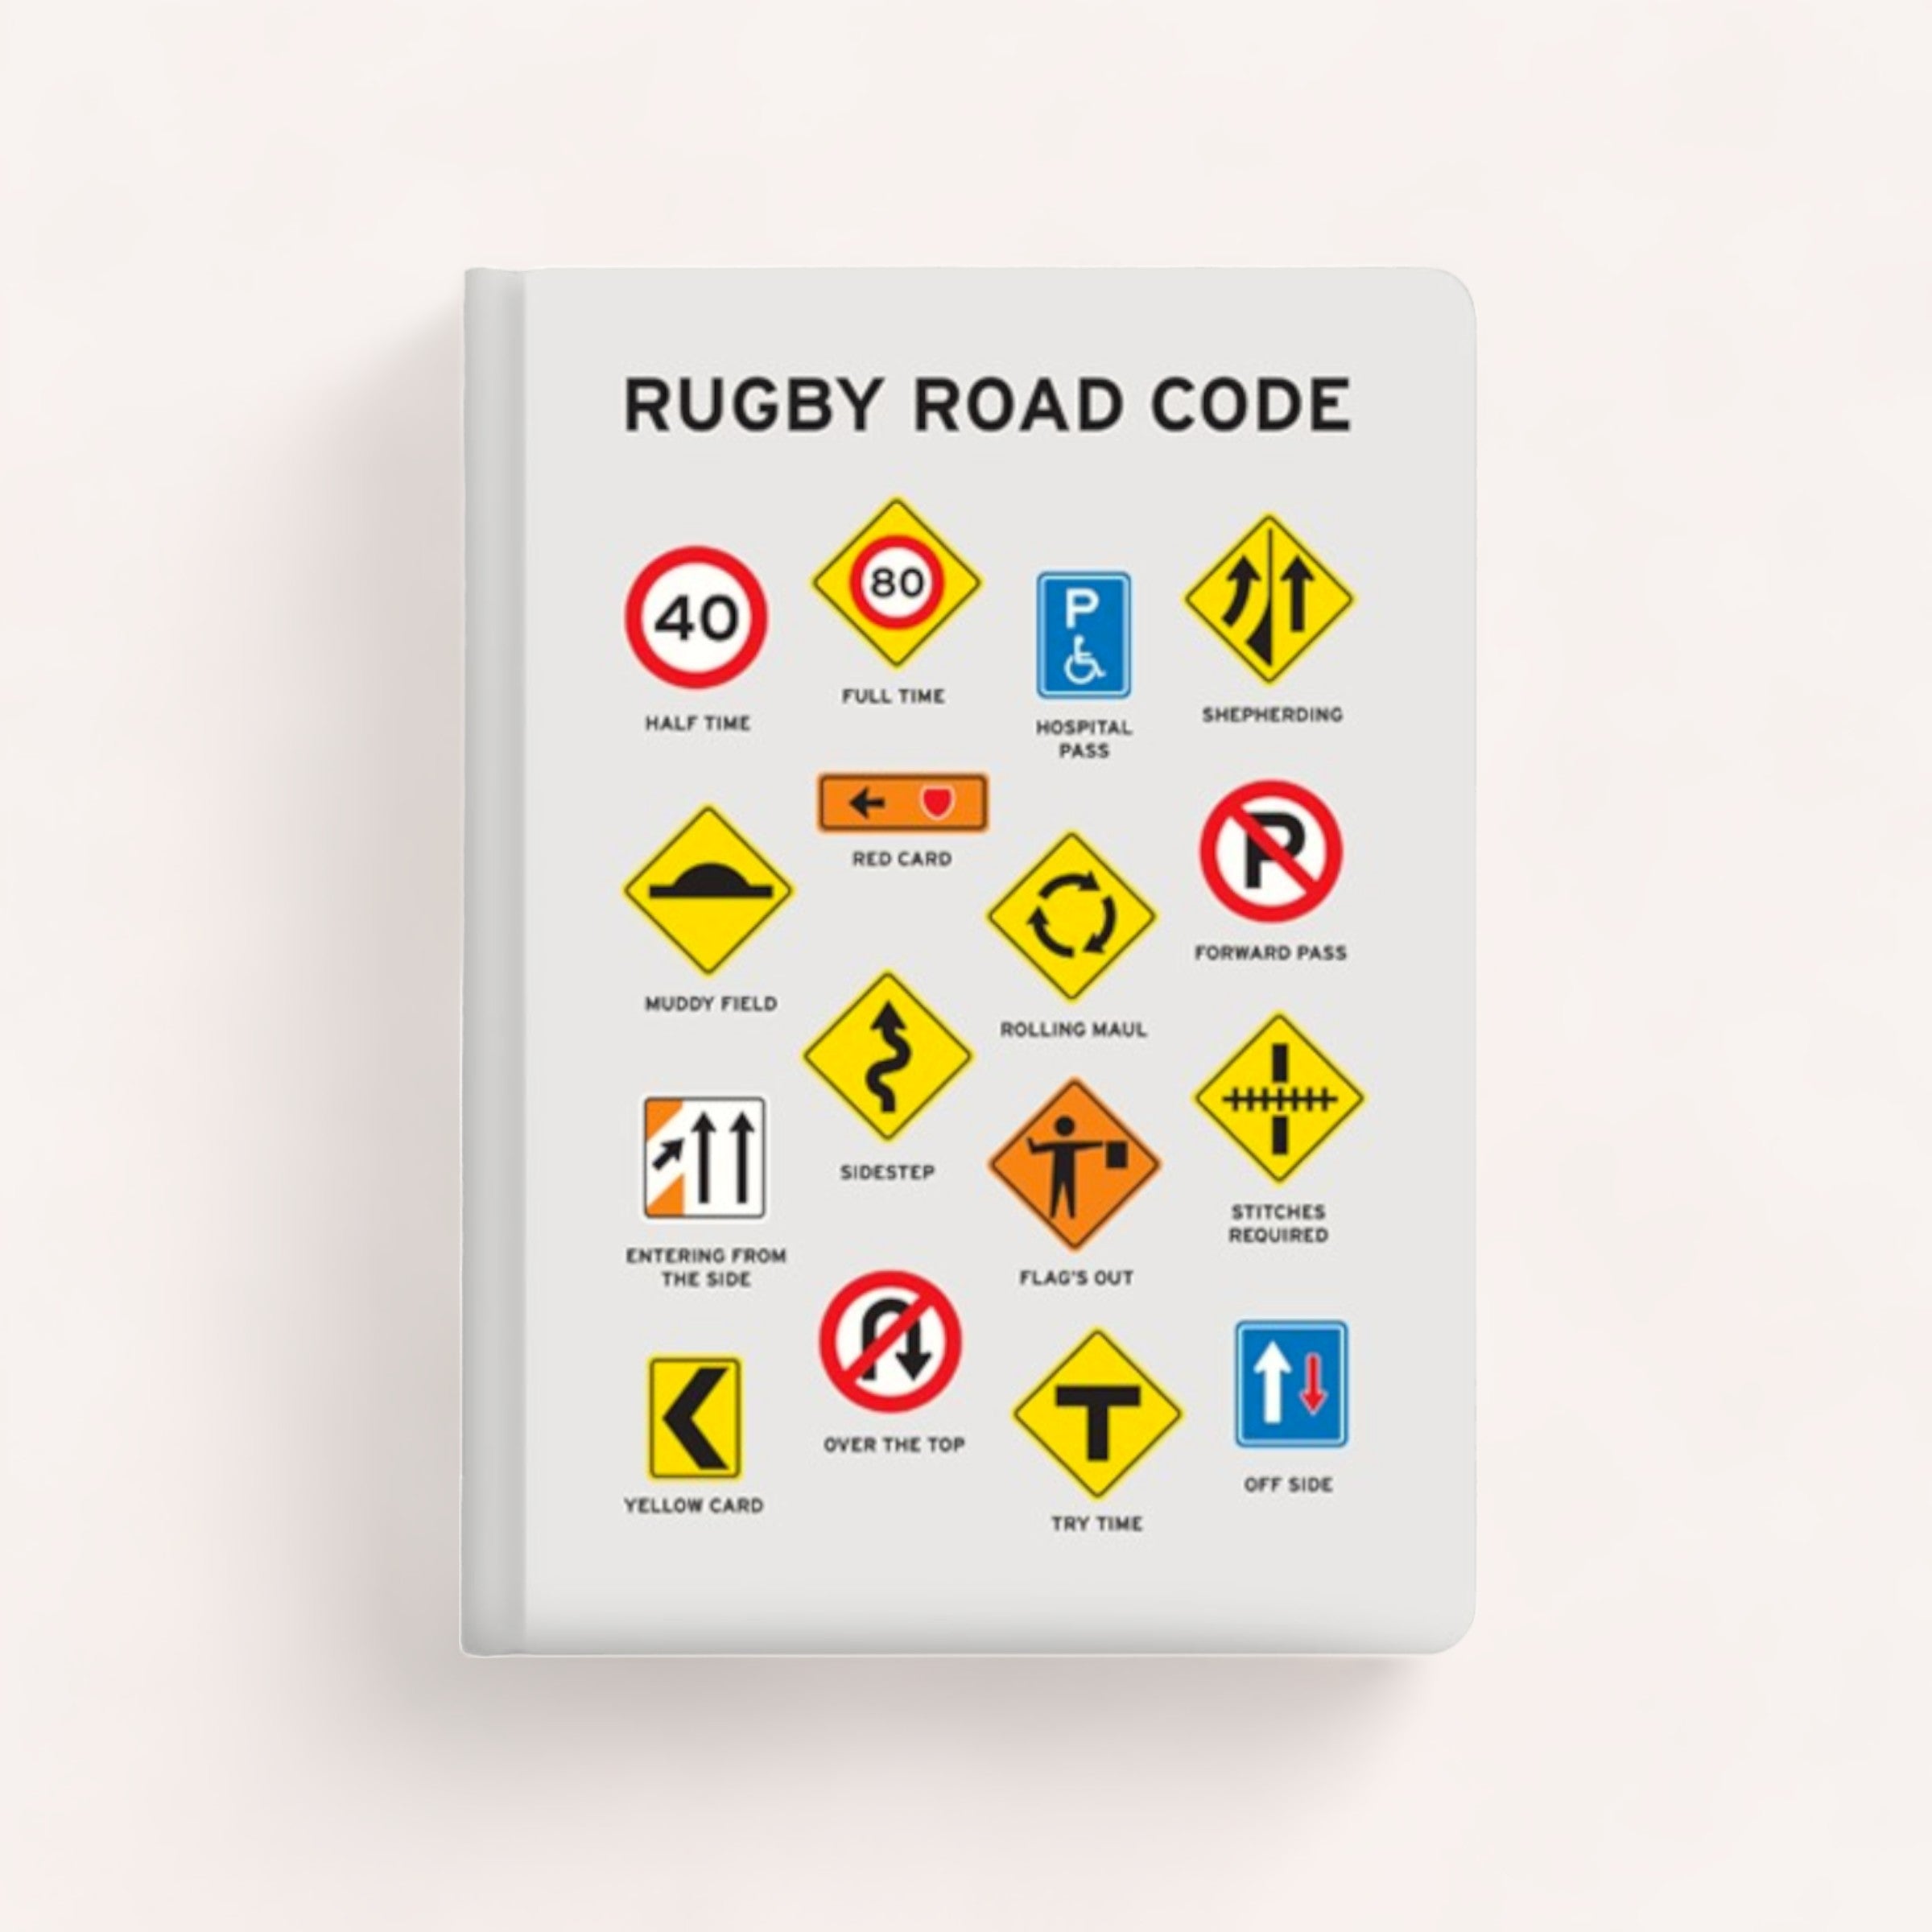 A stylish Rugby Road Code Journal designed by Glenn Jones Accessories, featuring rugby-related terms and symbols humorously adapted into traffic sign formats.